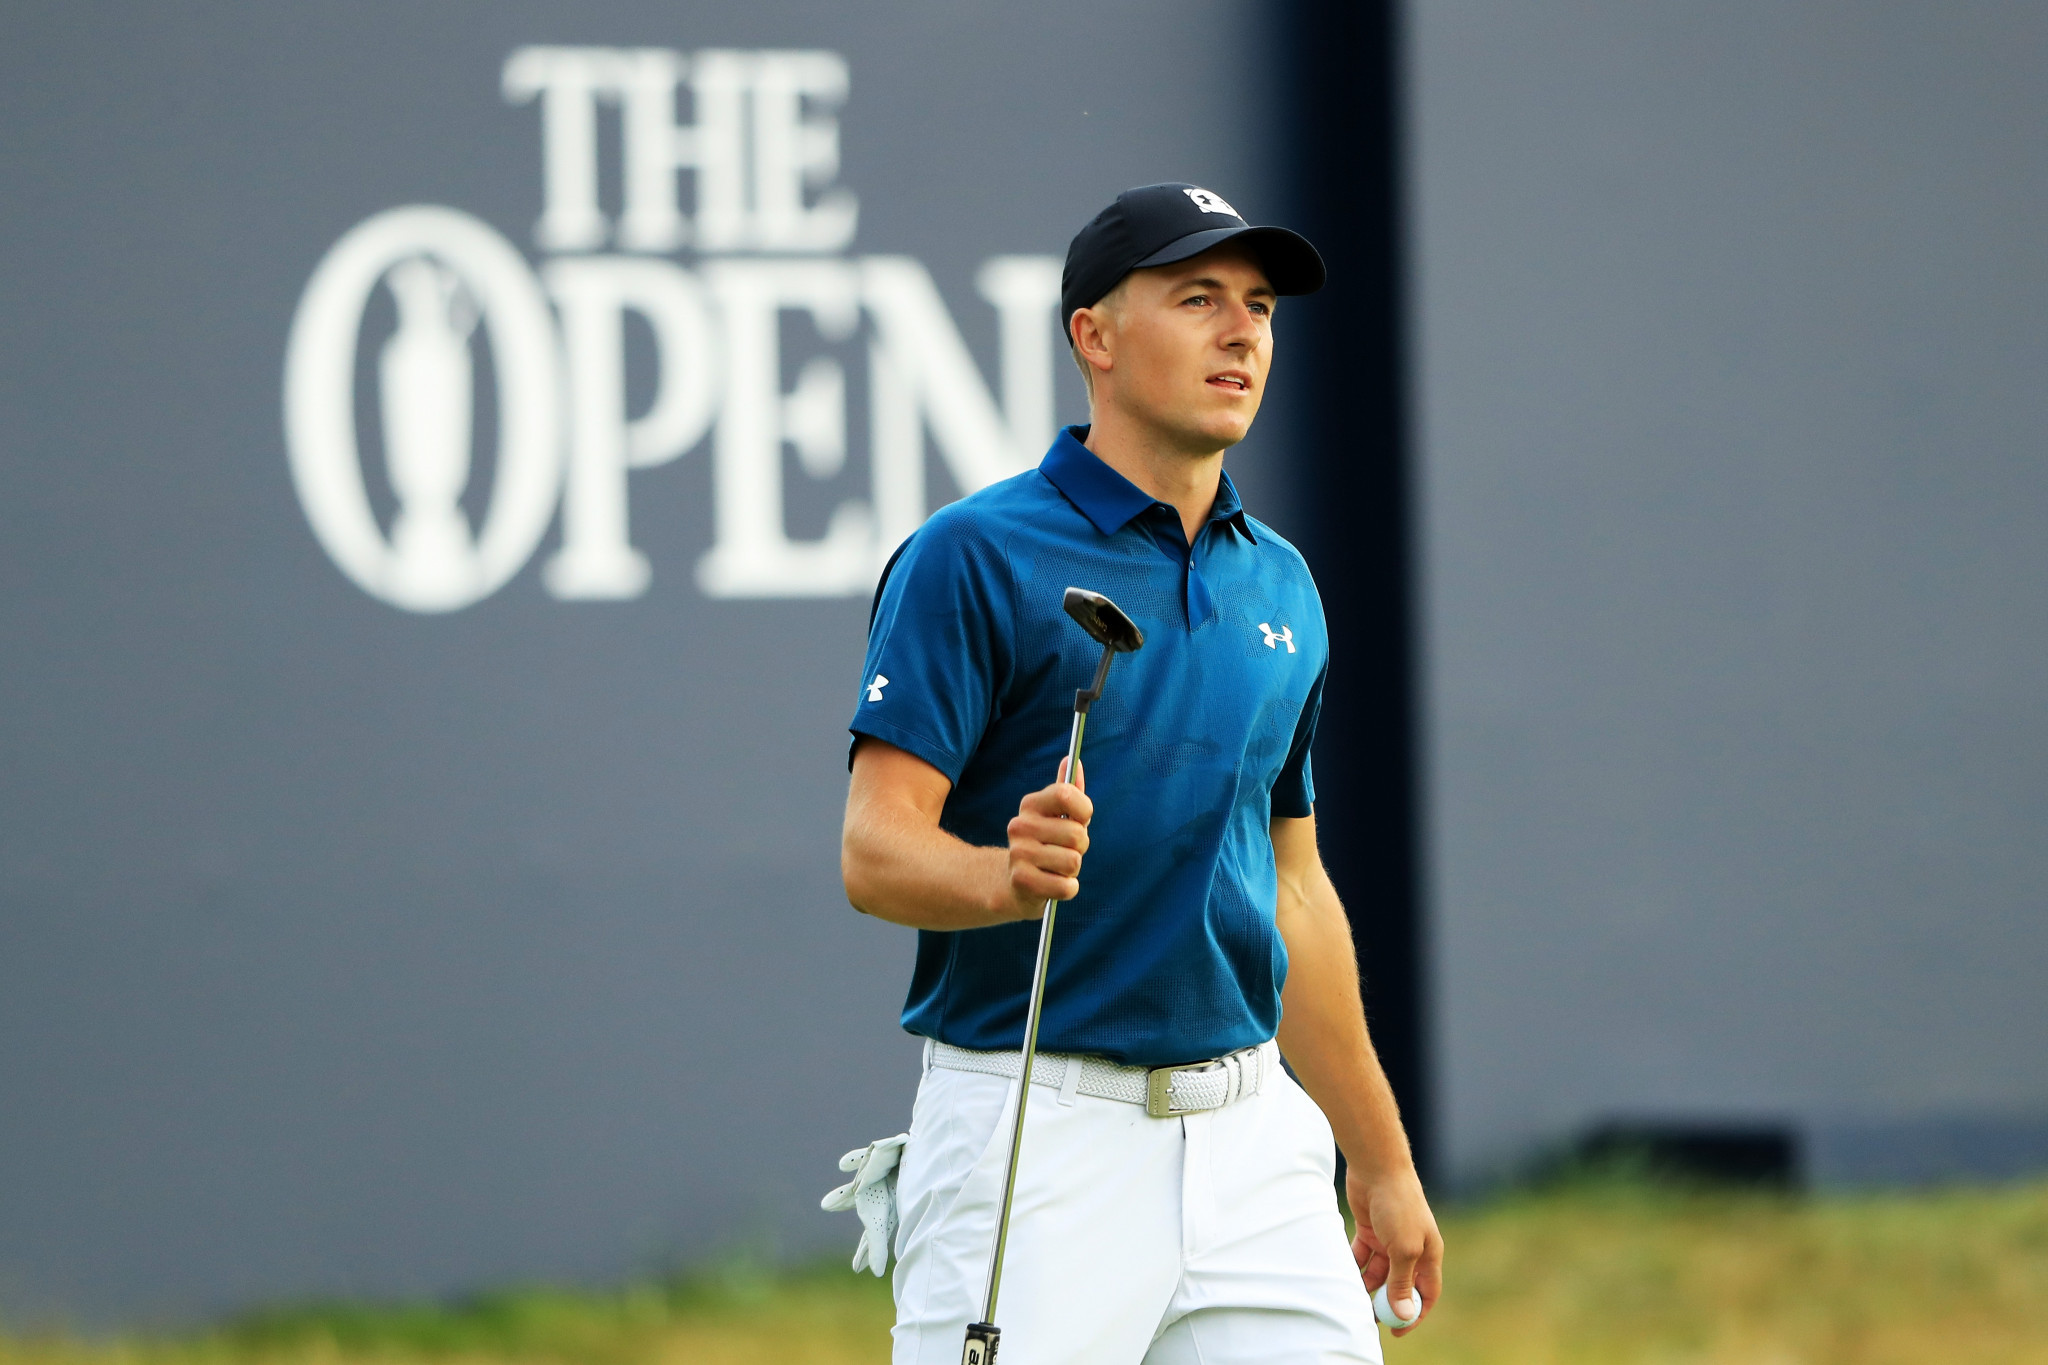 Defending champion Spieth shares lead going into final day of The Open but Woods still in contention